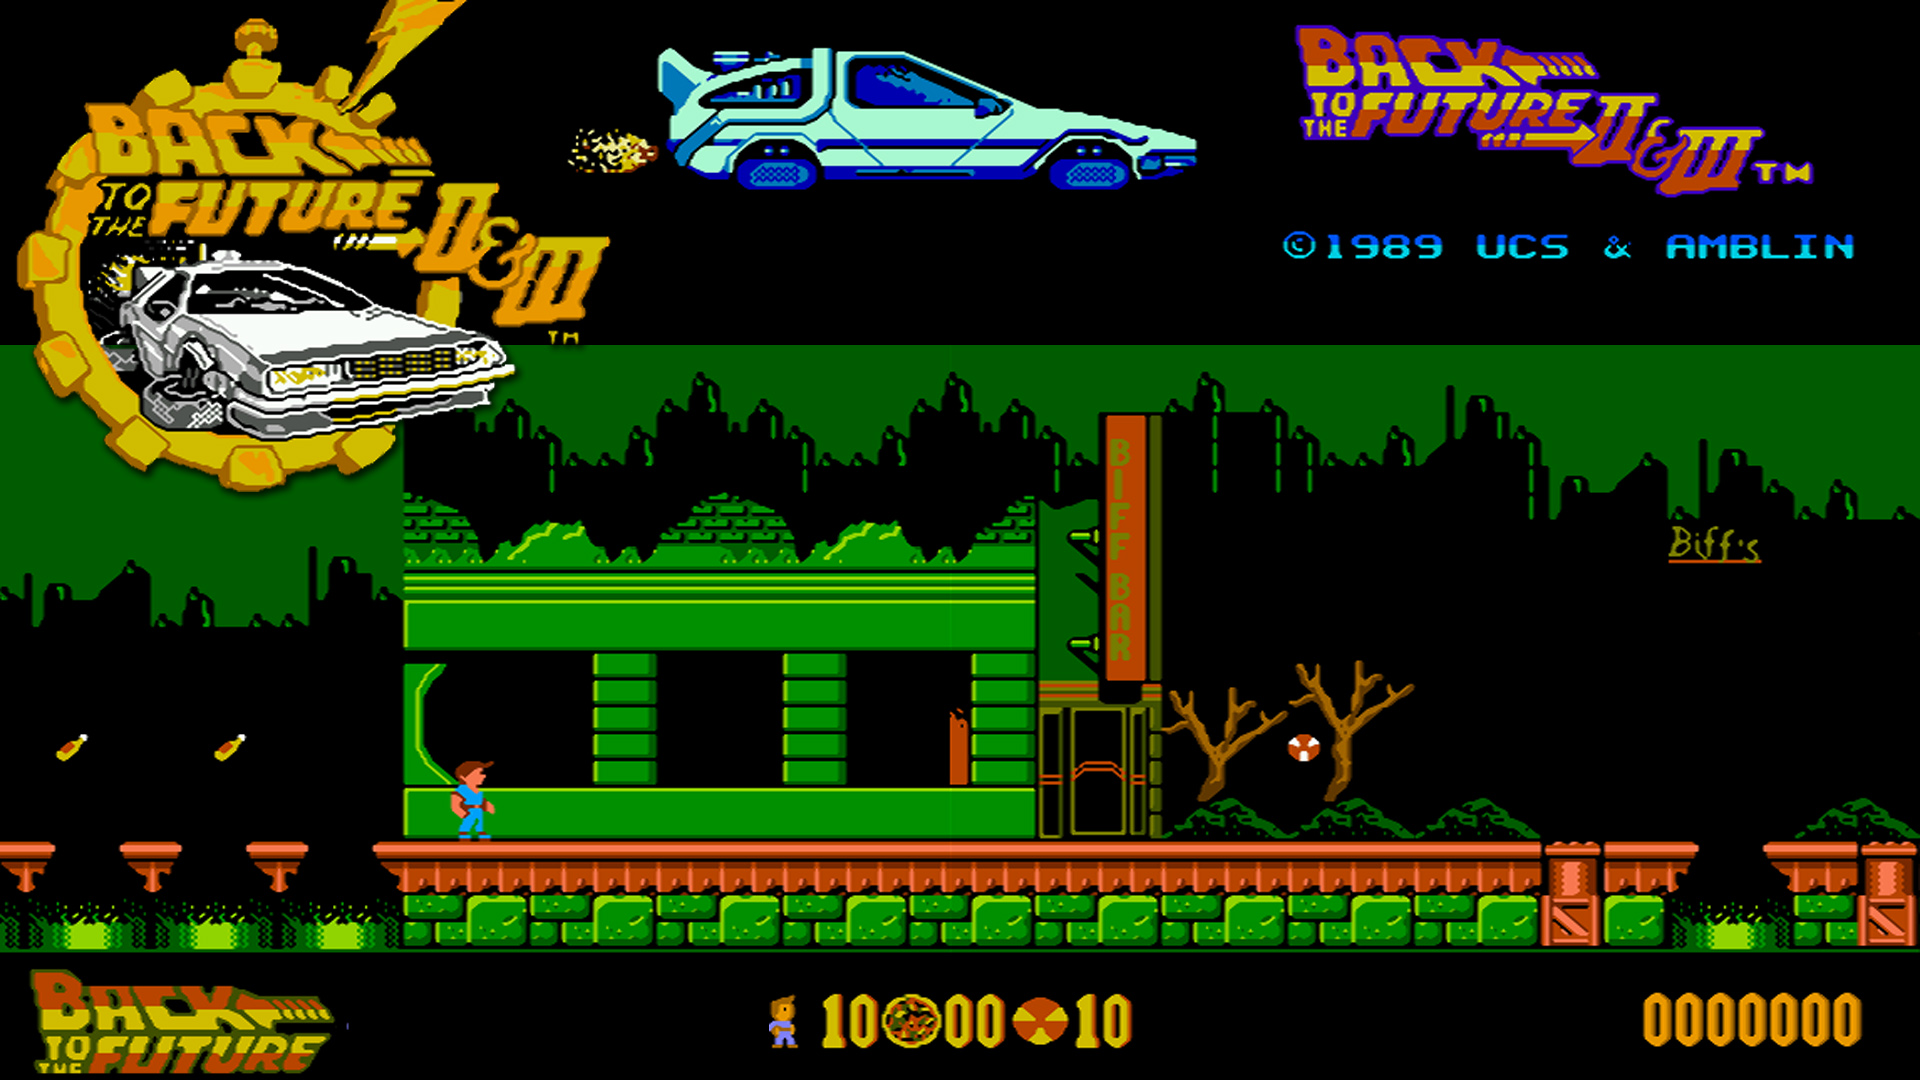 Video Game Back to the Future II & III HD Wallpaper | Background Image